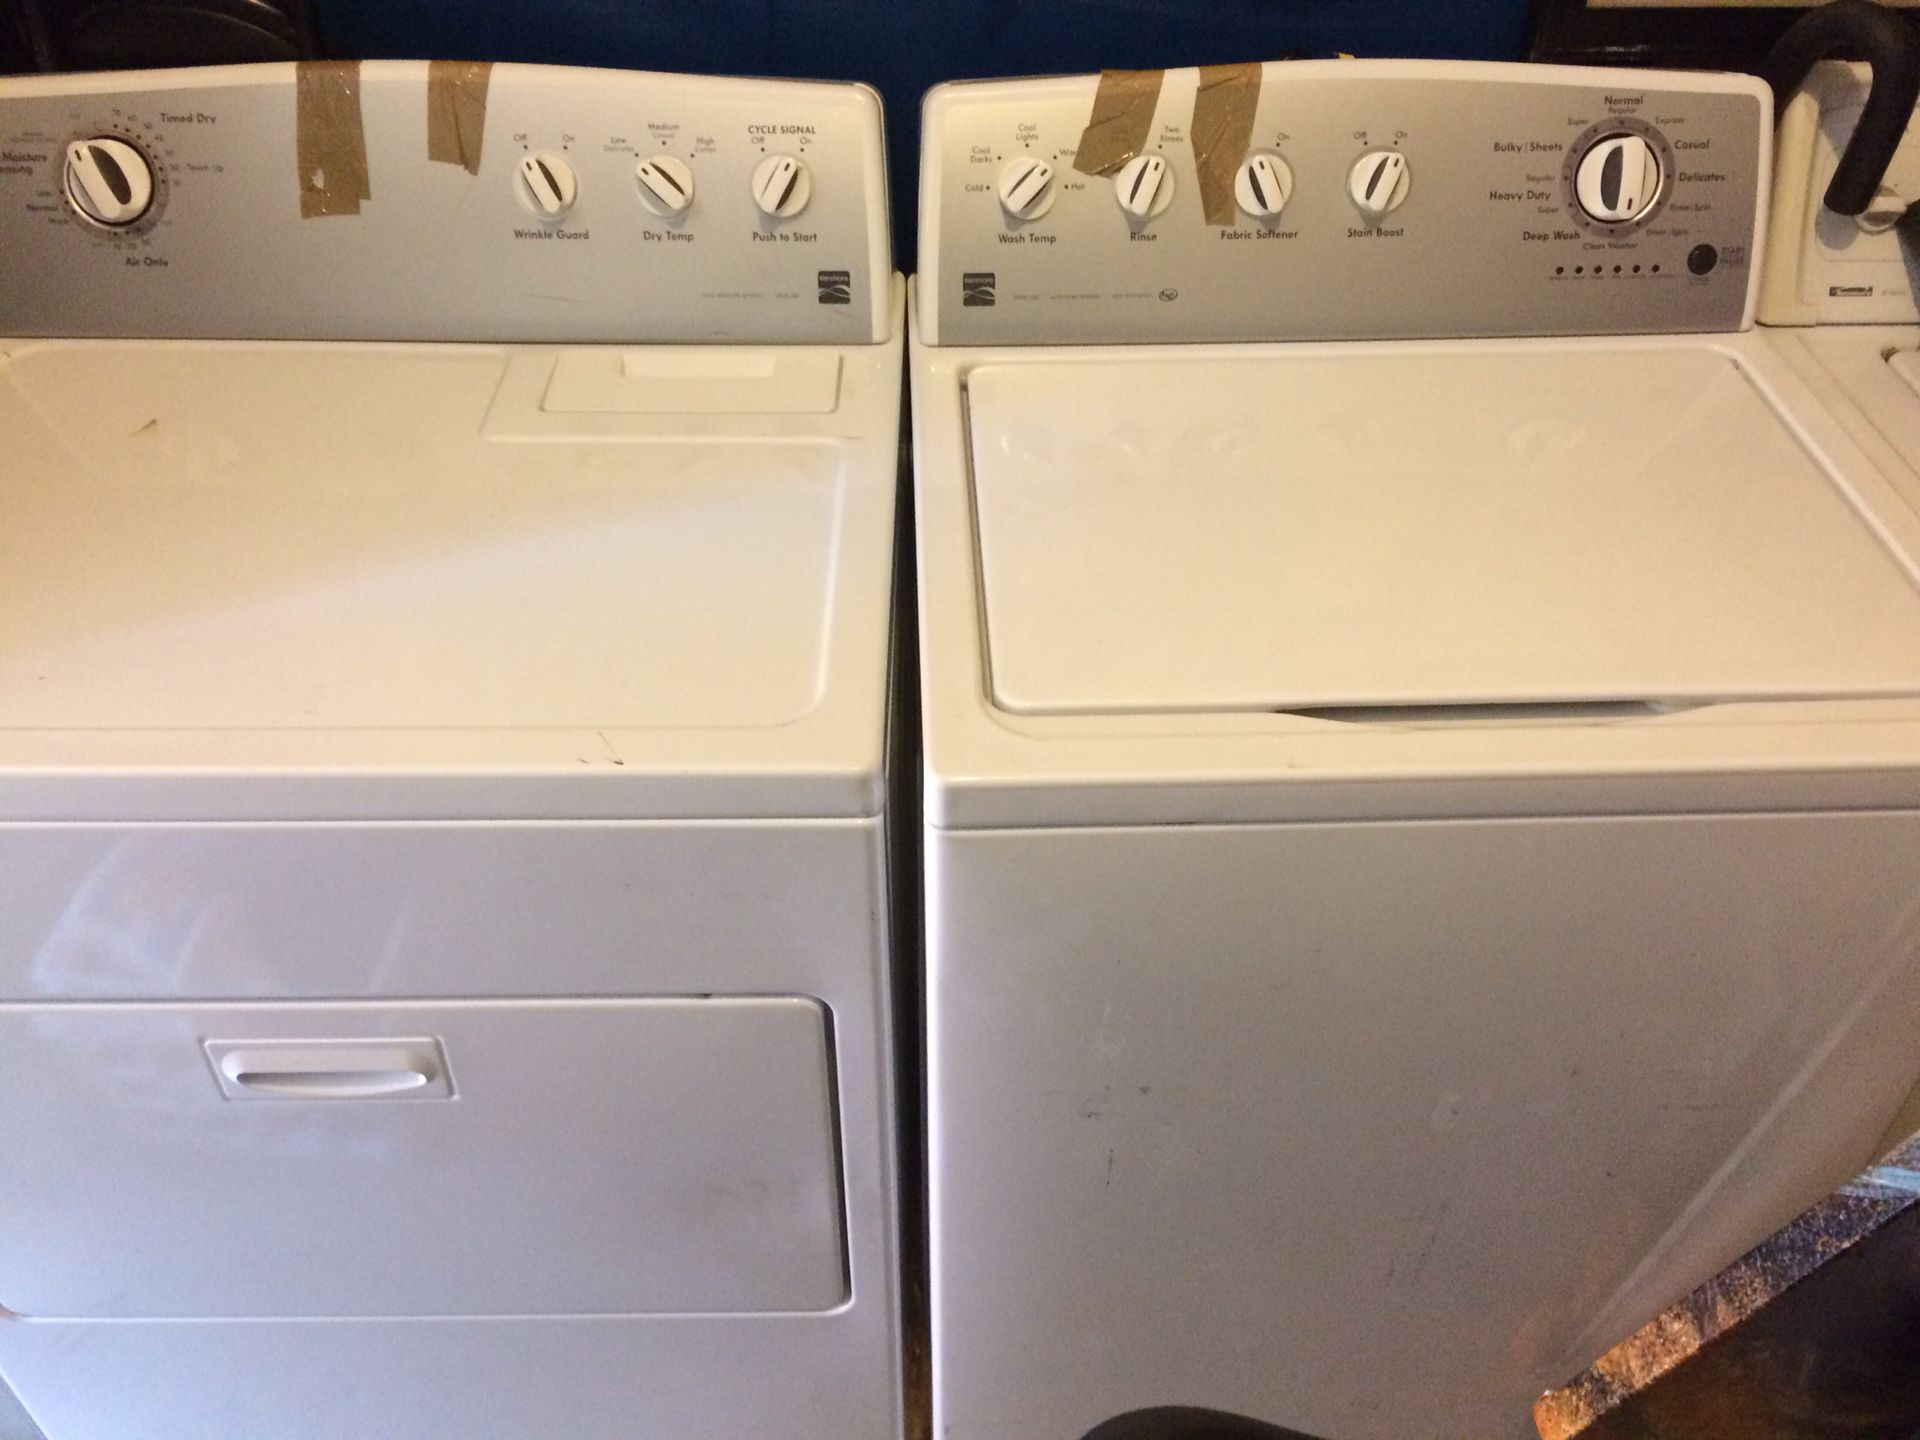 KENMORE Washer/Dryer both